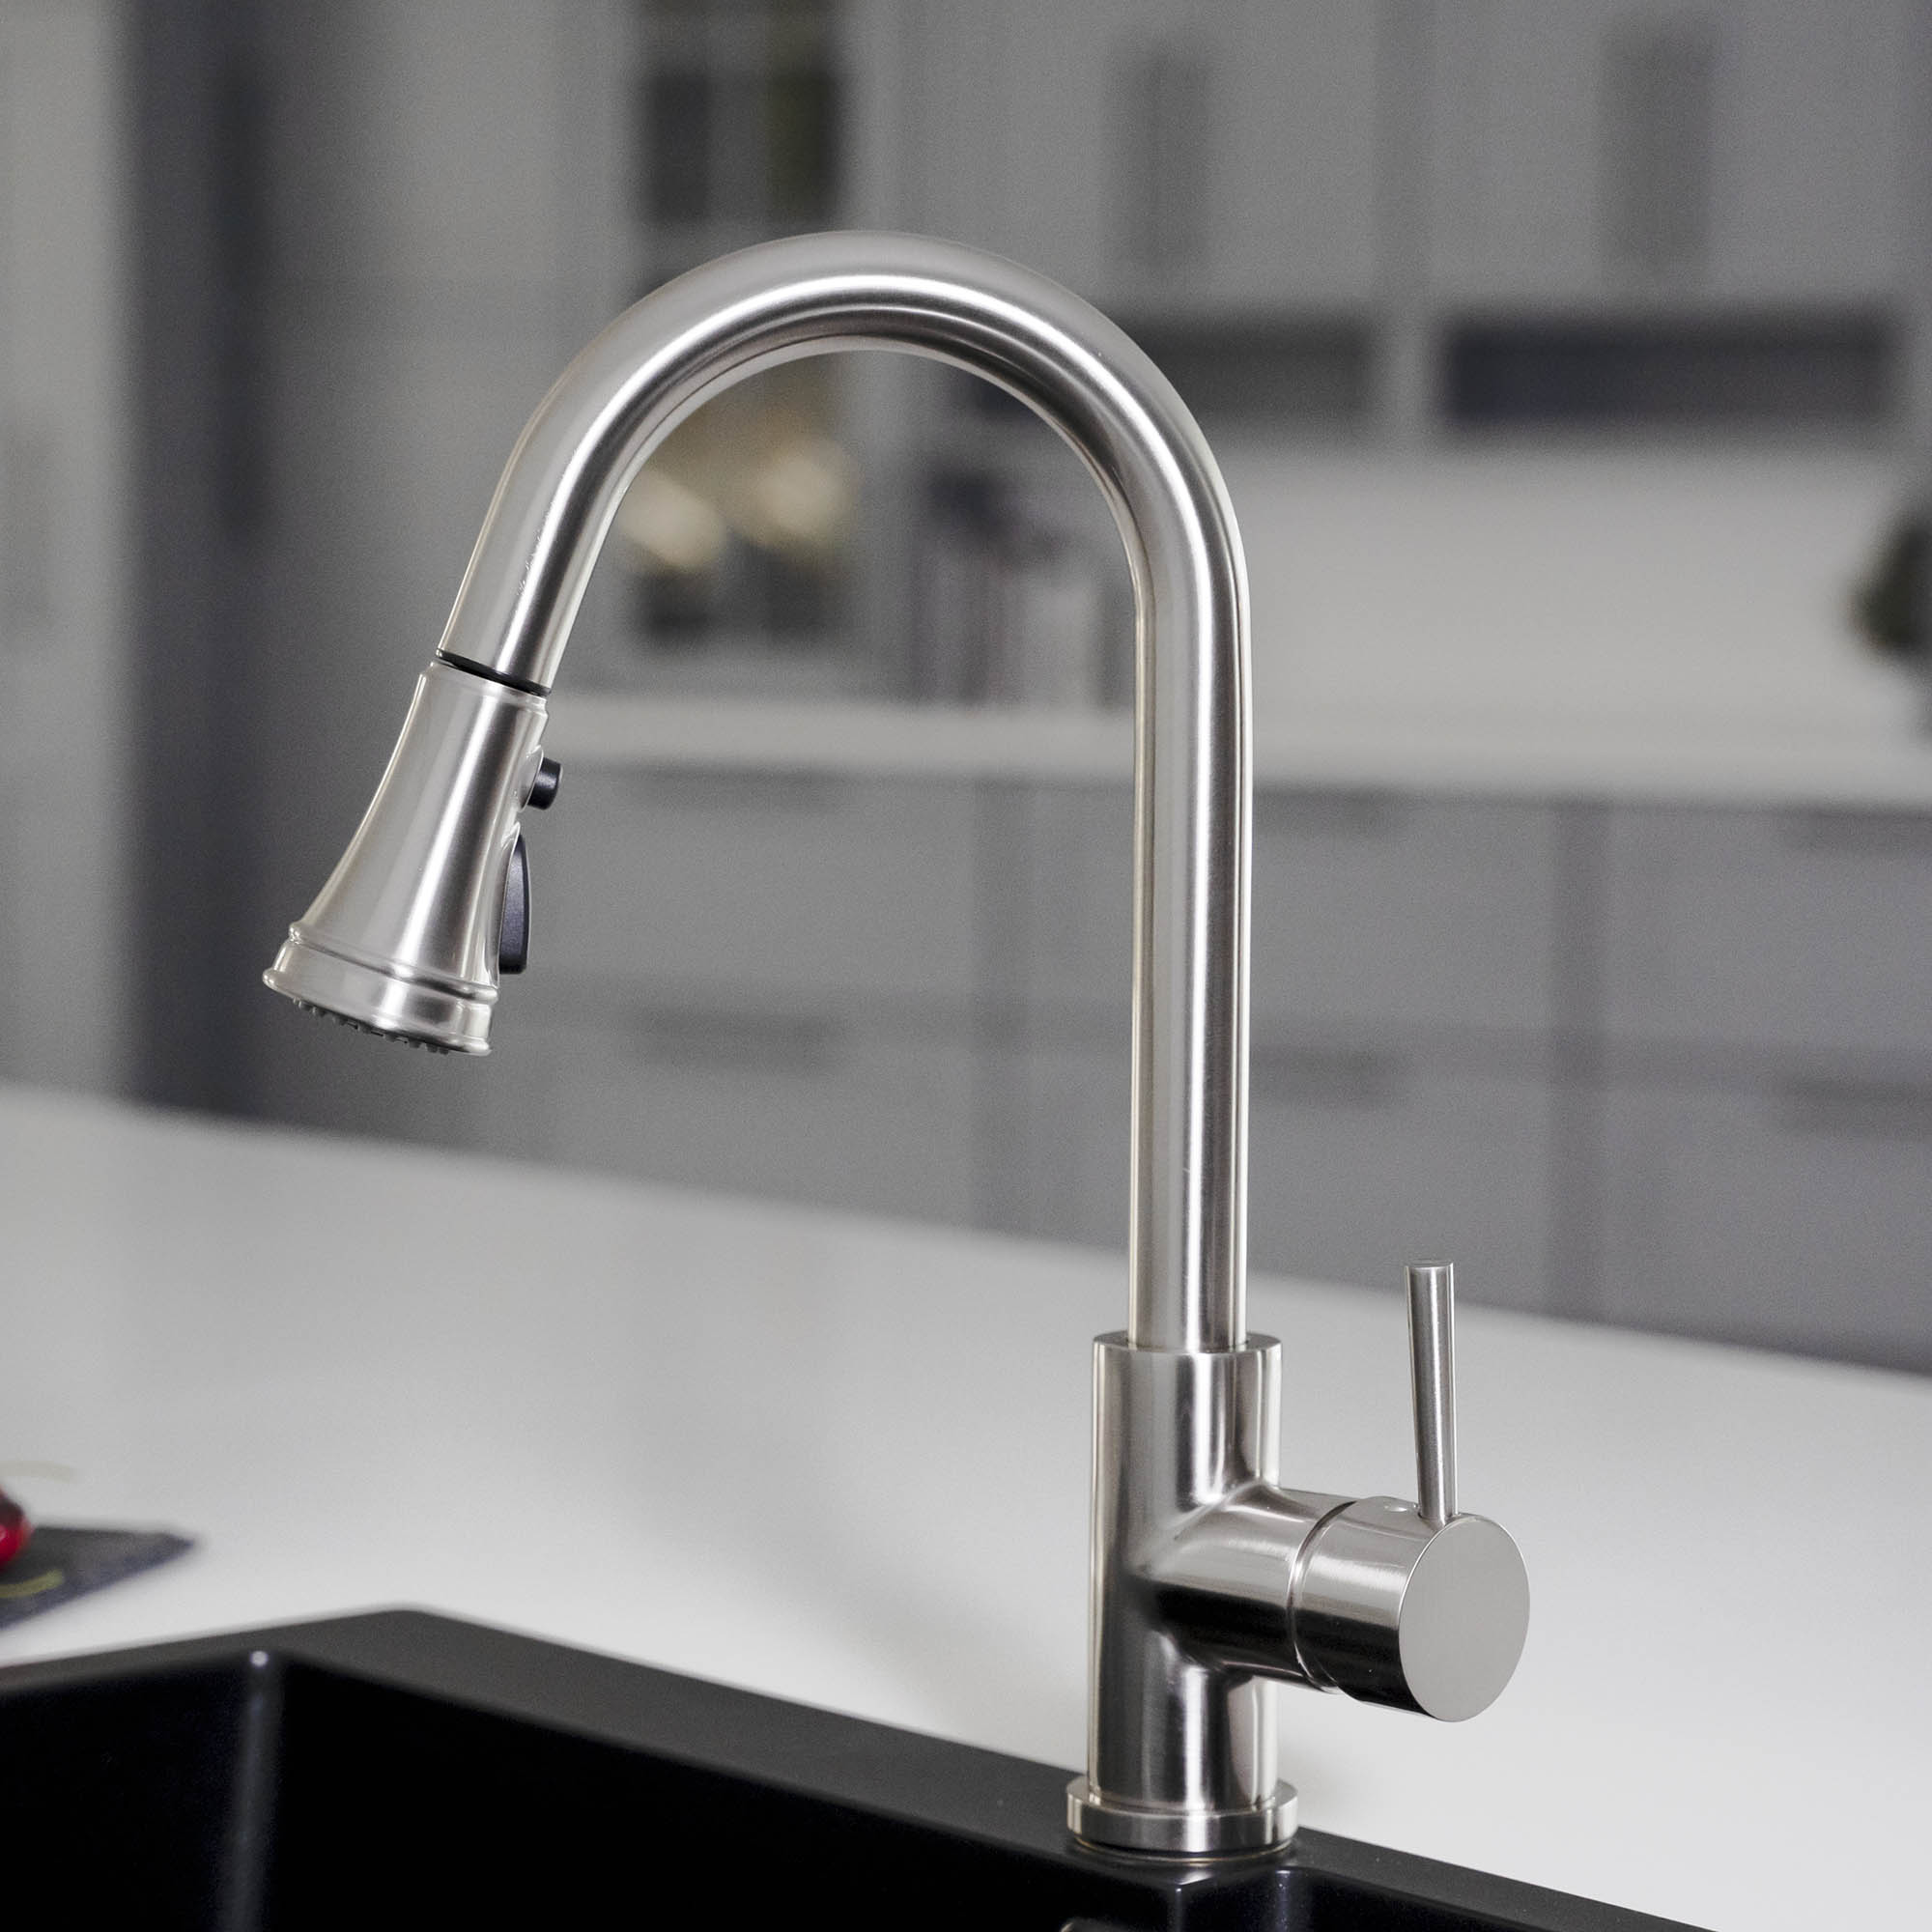 WOODBRIDGE WK090801BN Stainless Steel Single Handle Pull Down Kitchen Faucet in Brushed Nickel Finish.